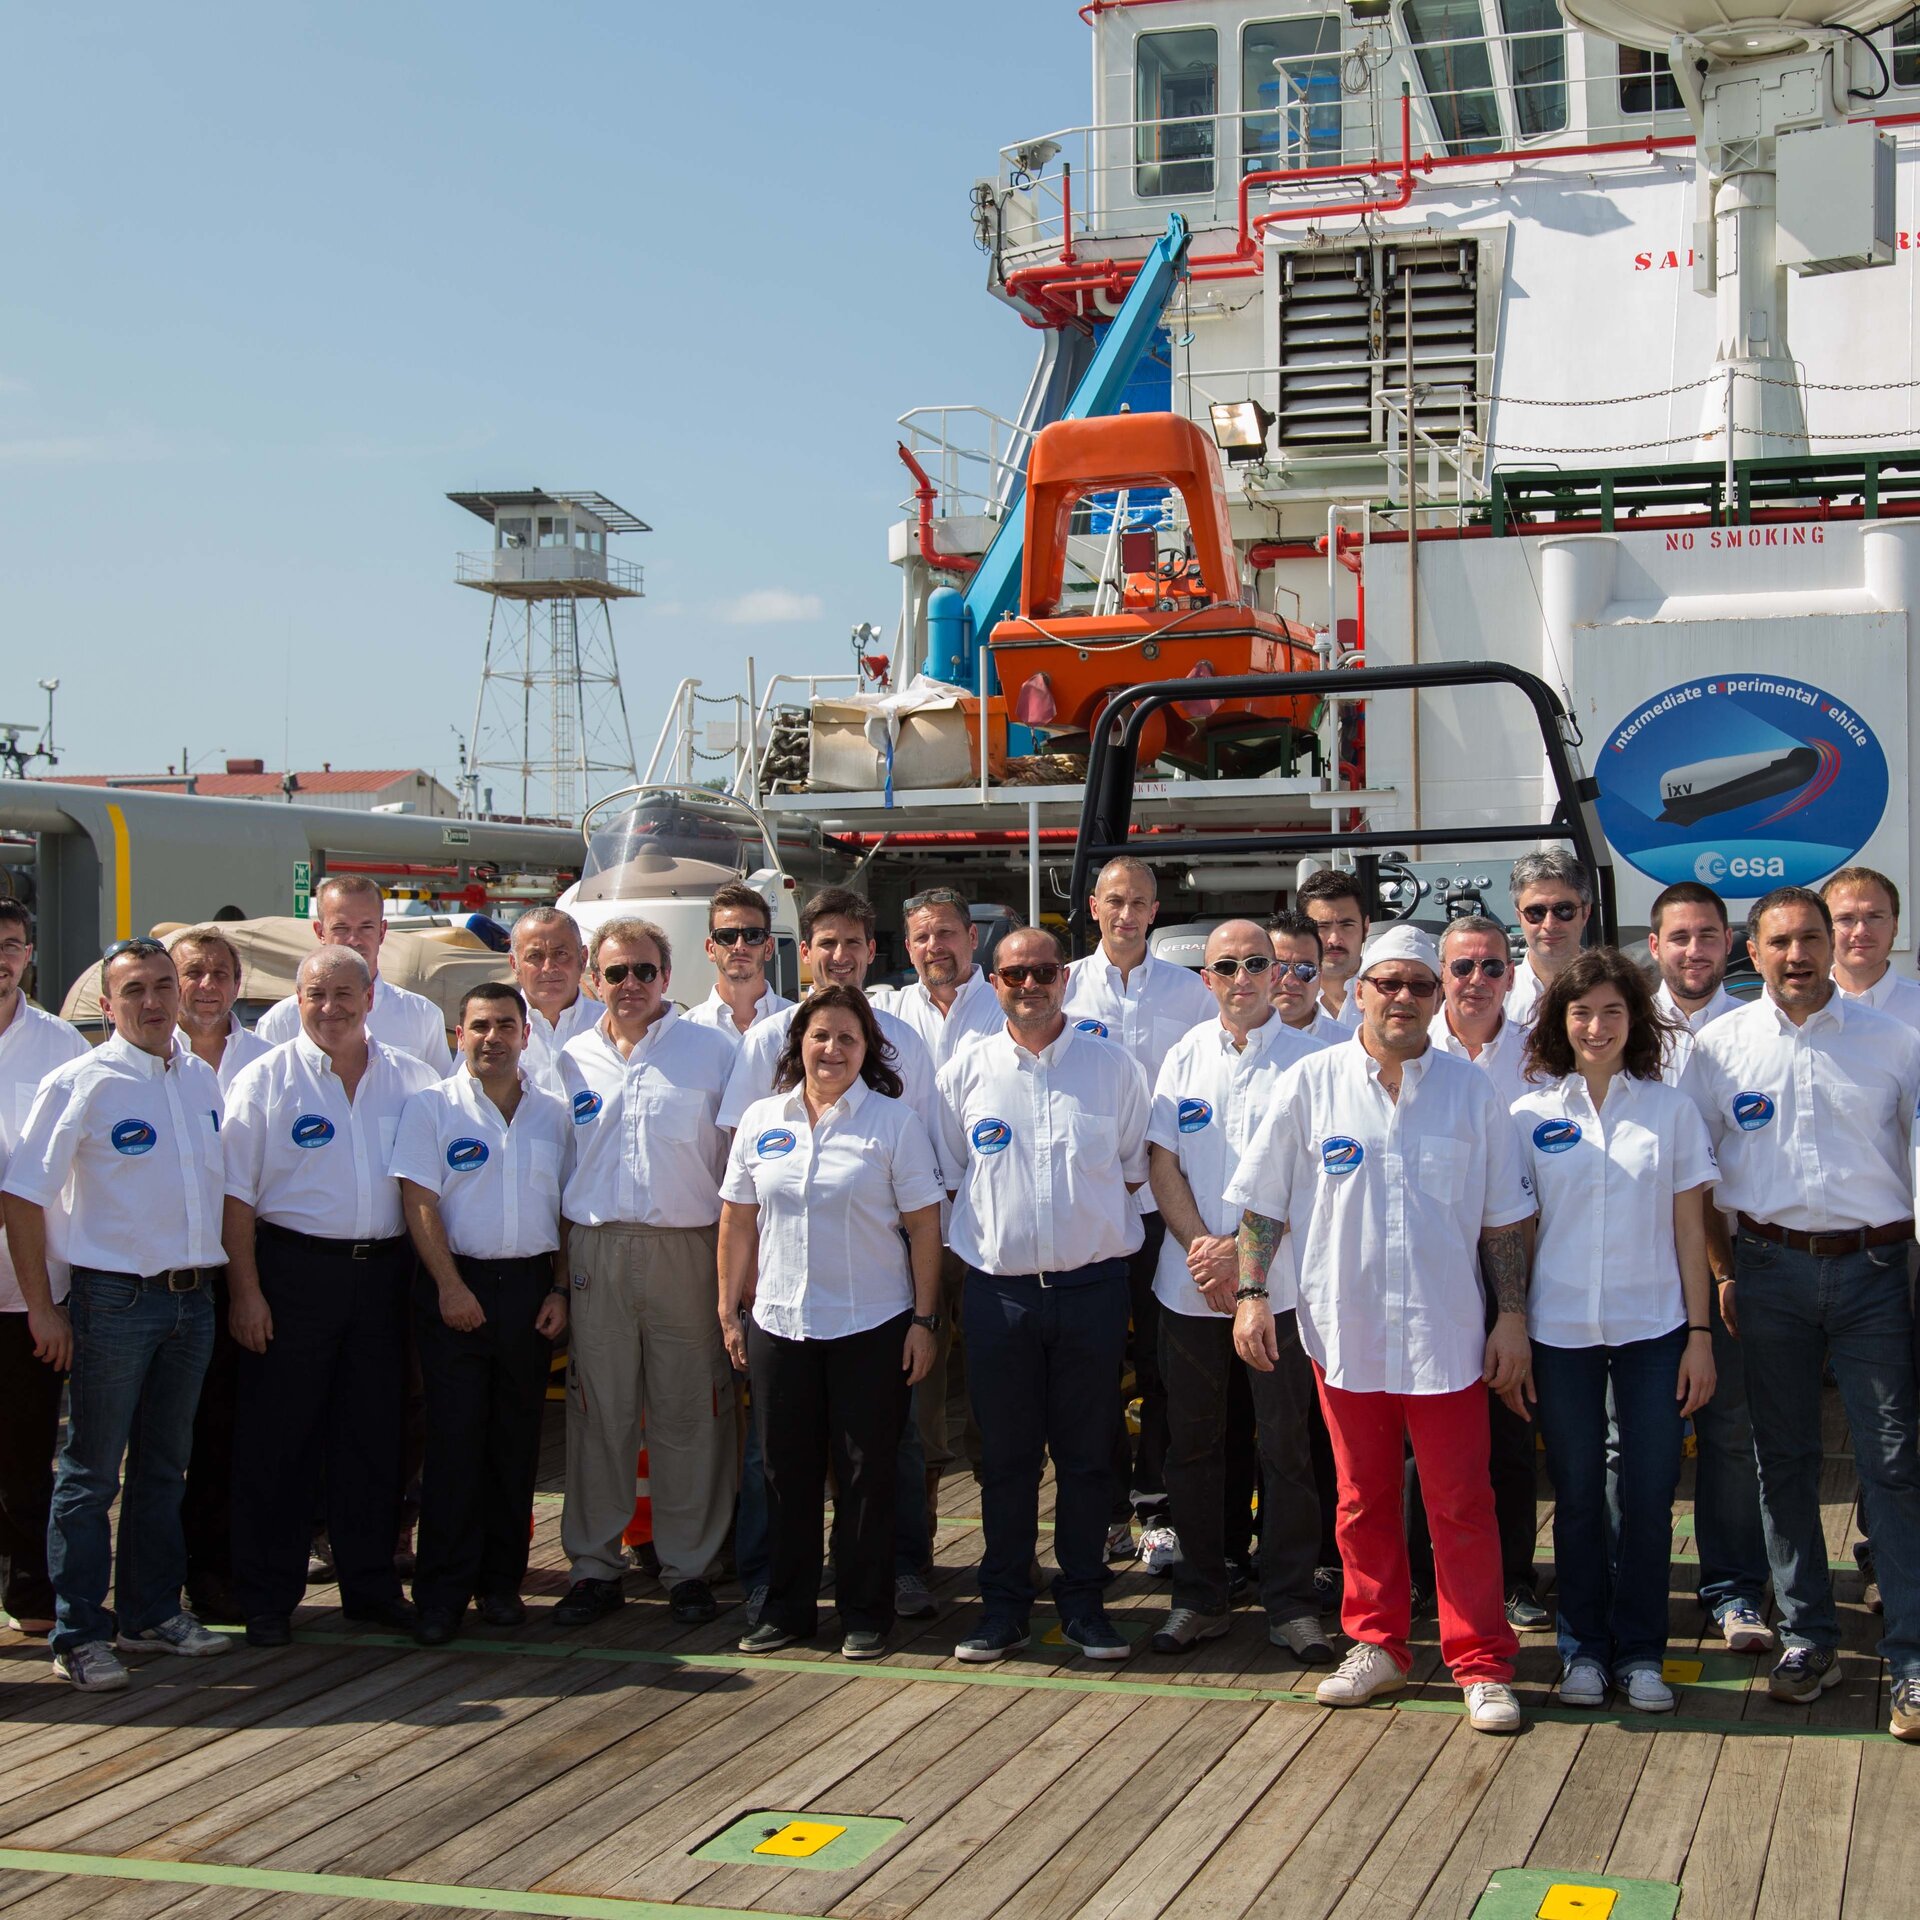 IXV mission engineers on board Nos Aries Panama